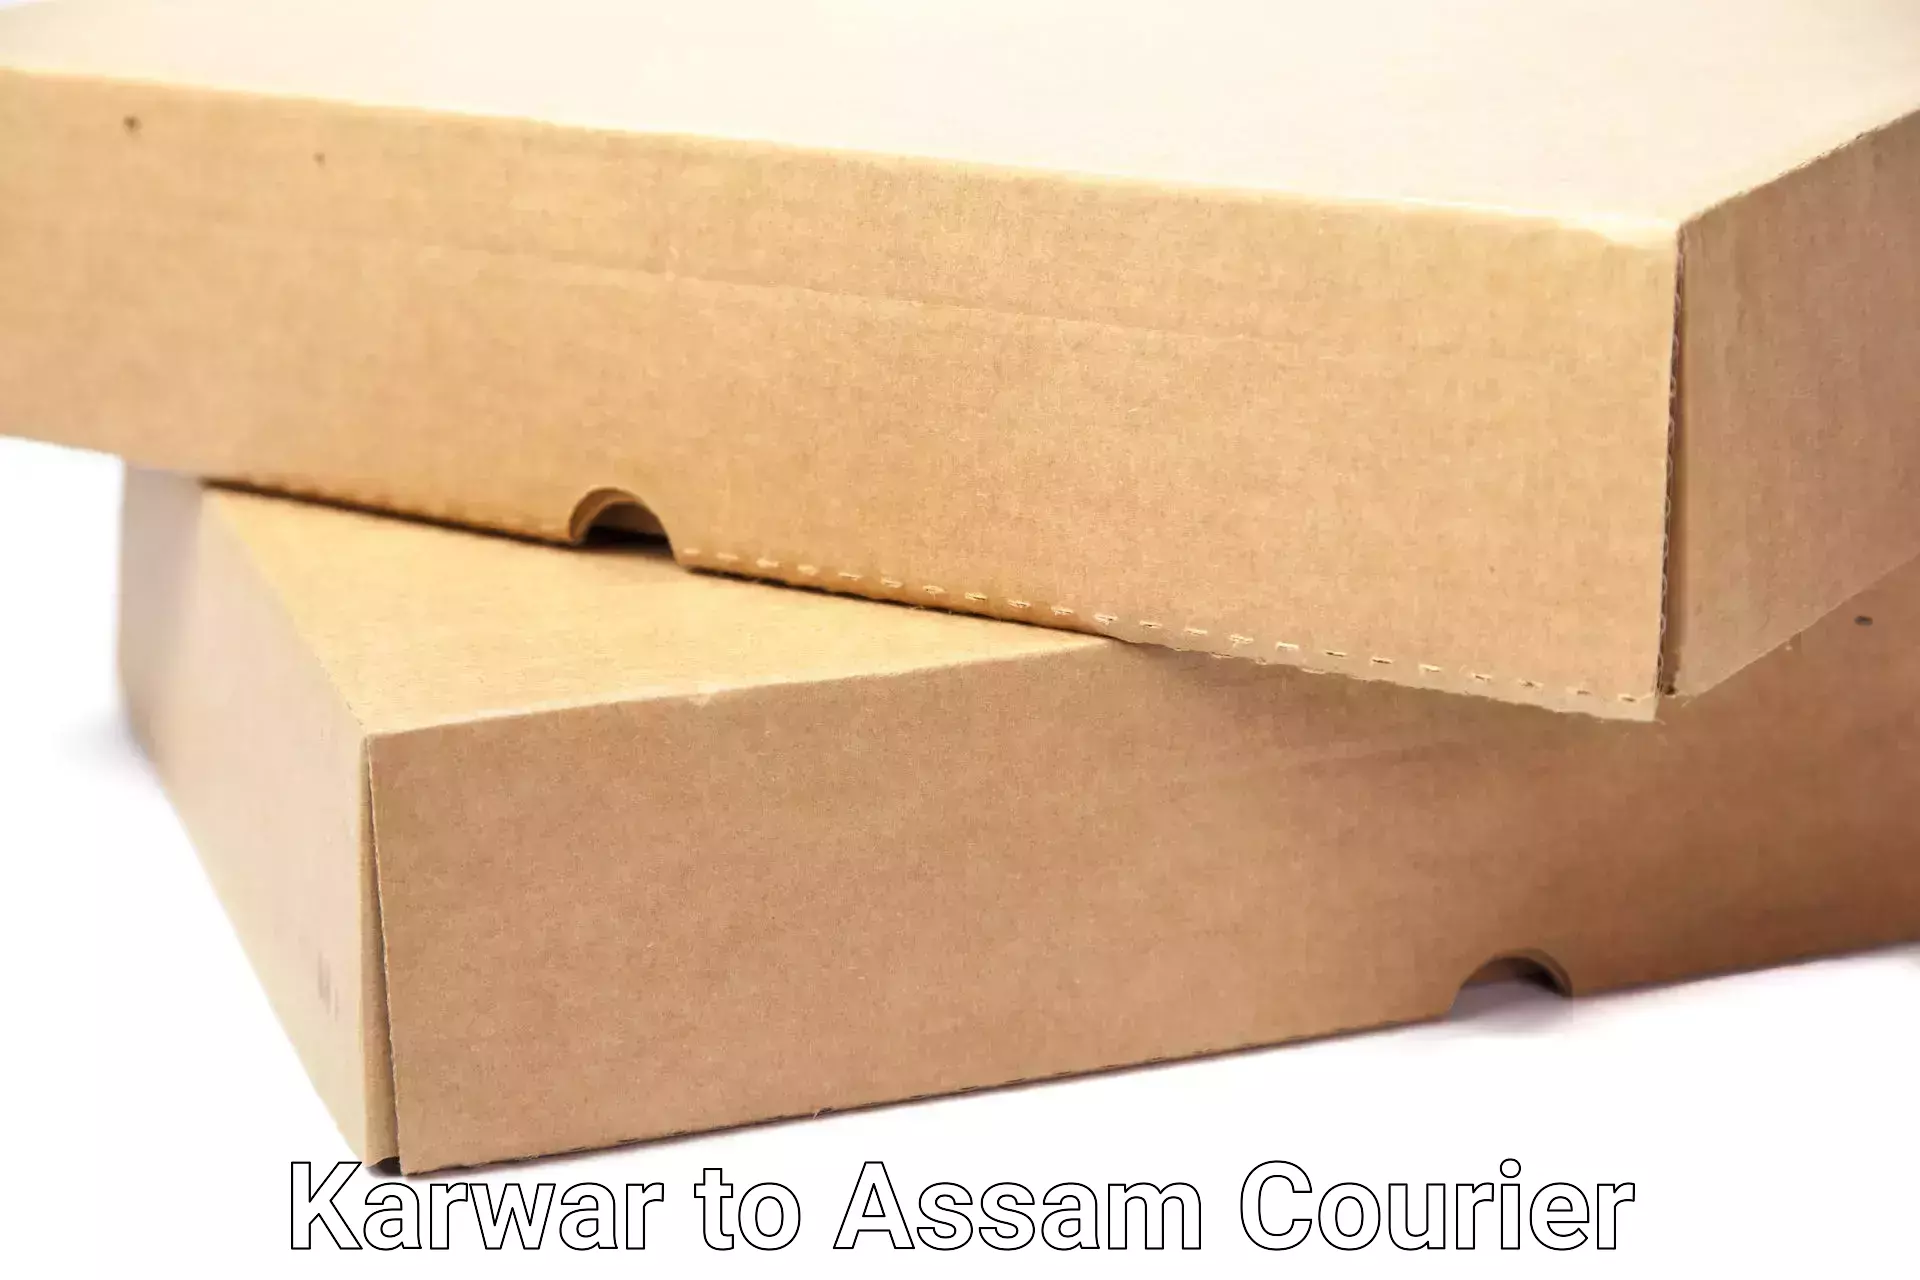 Full-service movers in Karwar to Lala Assam